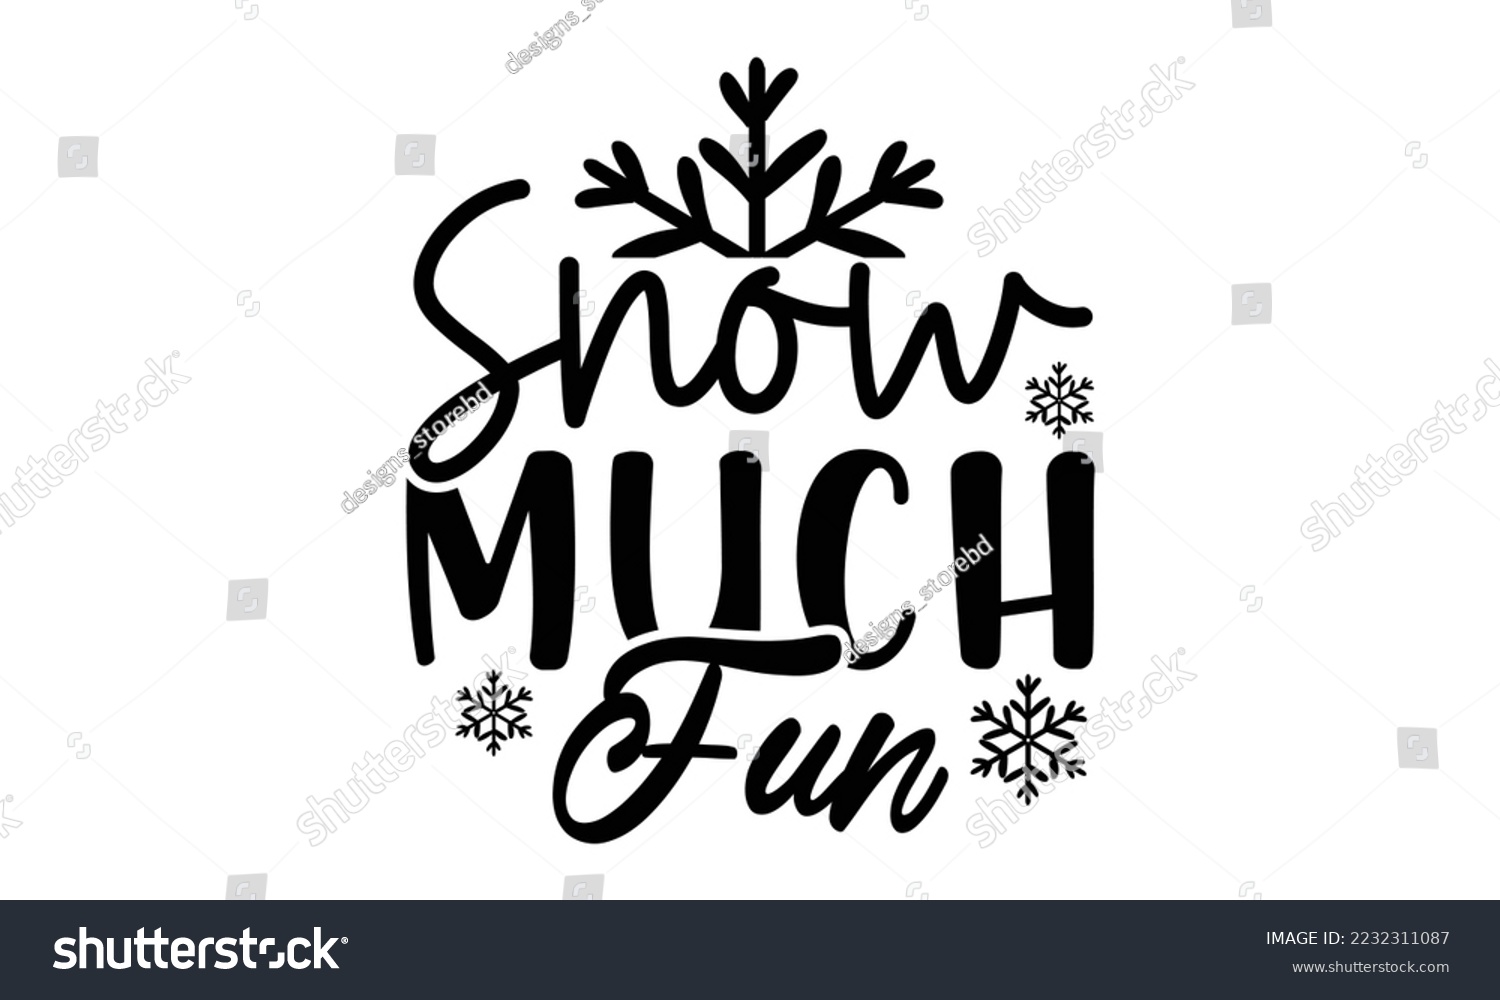 SVG of Snow much fun svg, Winter SVG, Winter T-shirt Design Template SVG Cut File Typography, Winter SVG Files for Cutting Cricut and Silhouette Printable Vector Illustration. greeting card, poster, banner,  svg